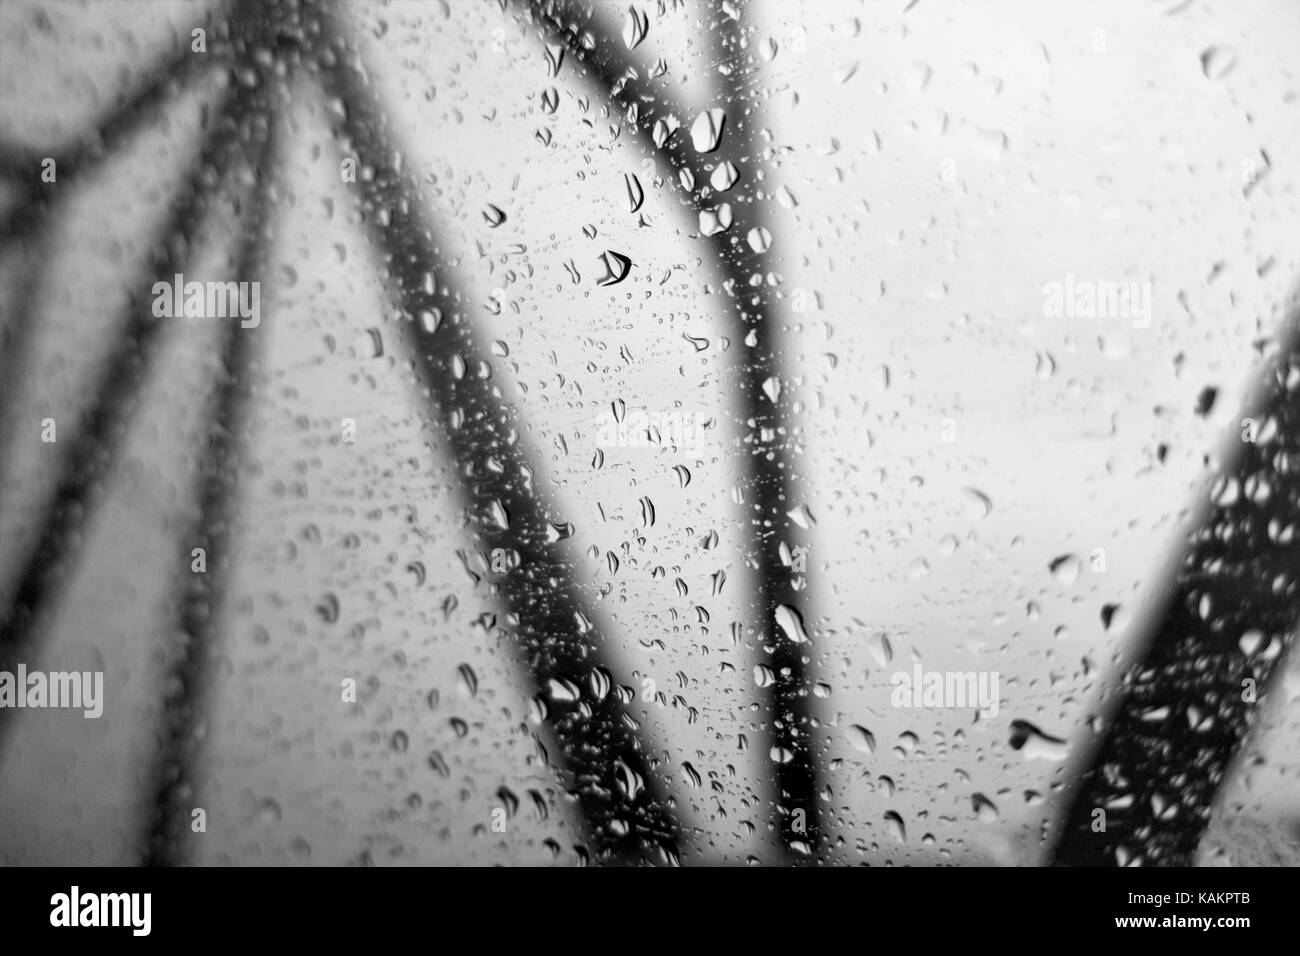 Looking out of windows covered with water droplets at black bridge struts on a gray sky. Concept. Stock Photo